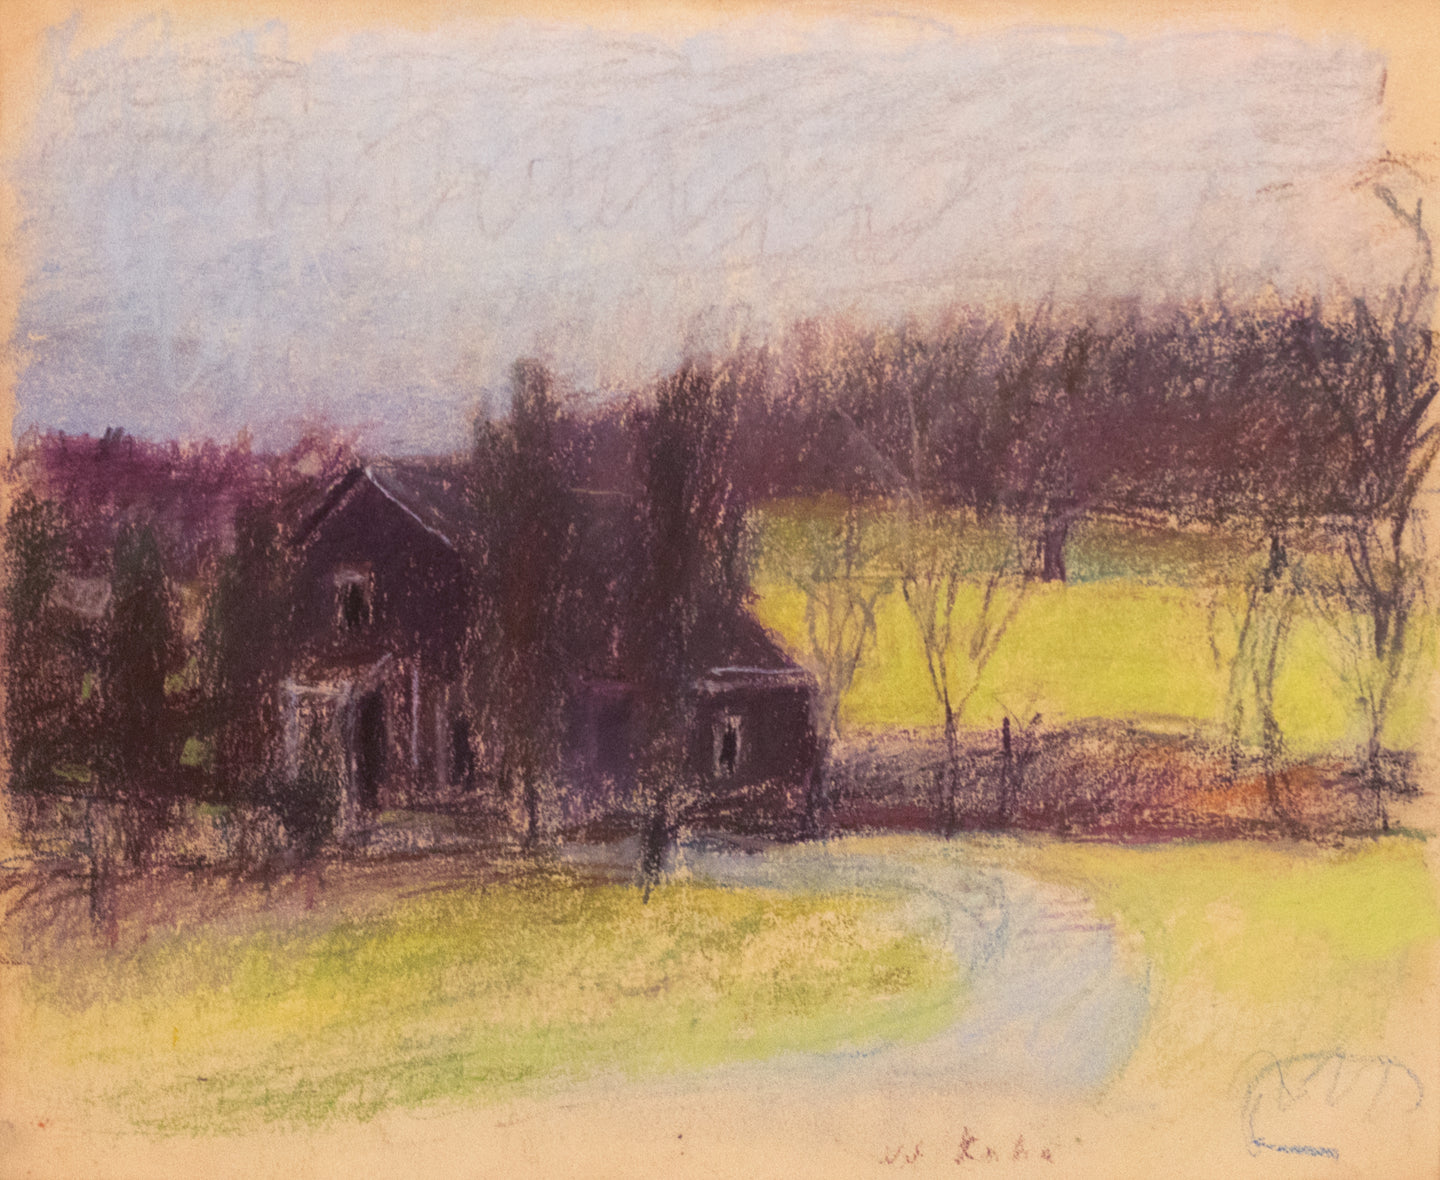 Wolf Kahn (1927-2020)  In Green Camp, 1982  Pastel on paper  14 x 17 inches (unframed). This is a landscape with home in the foreground and green fields and trees in the background. The sky is a baby blue. Available at Manolis Projects Gallery.